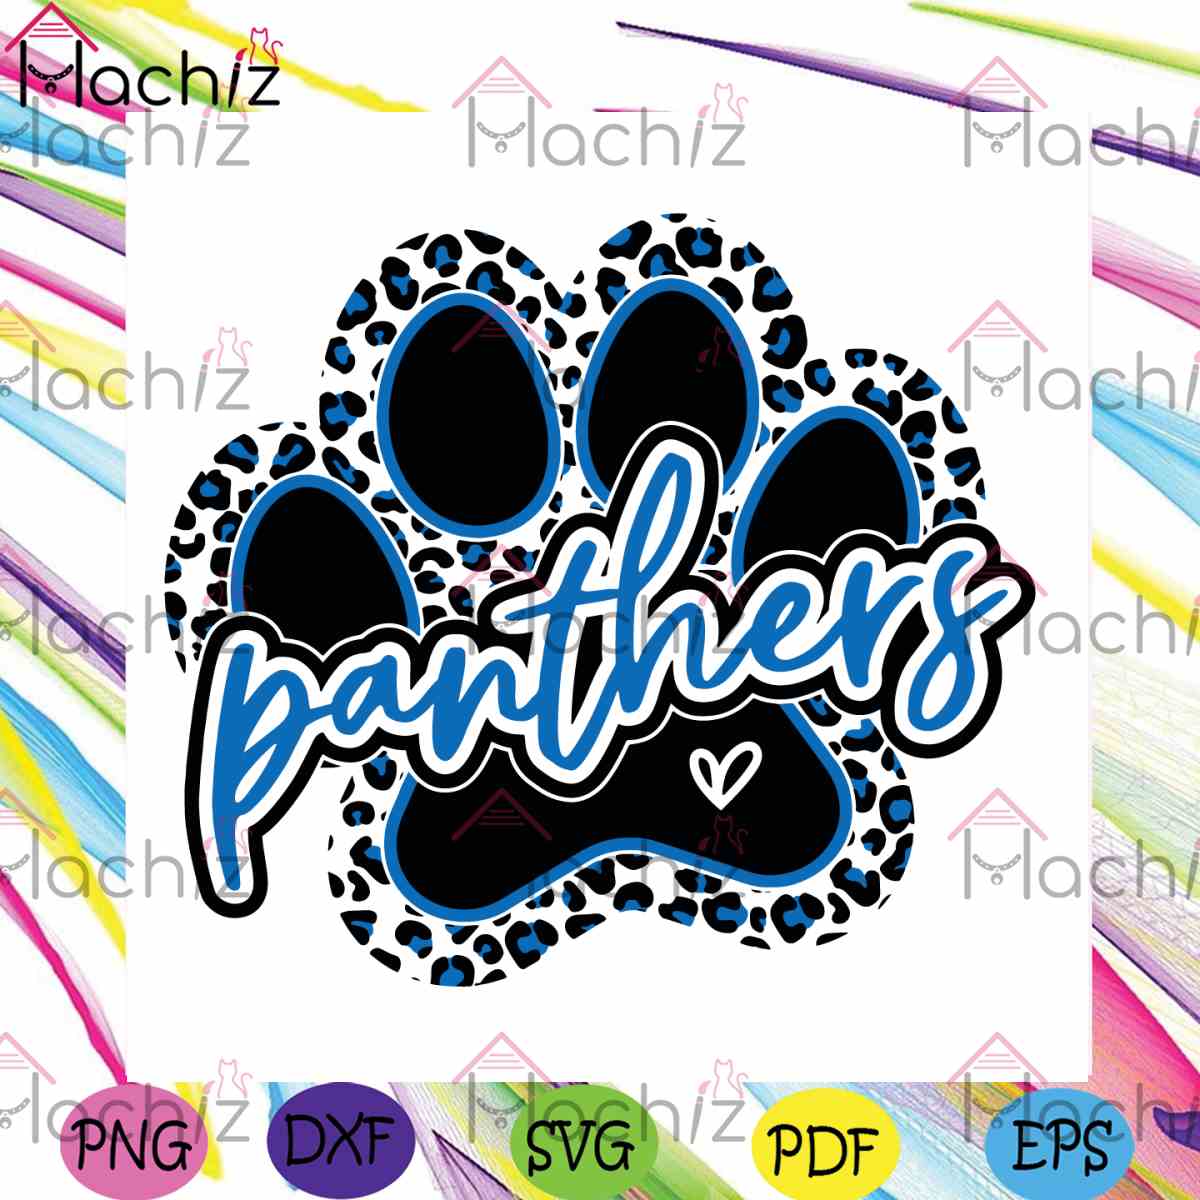 panthers-paw-leopard-football-team-svg-for-cricut-sublimation-files